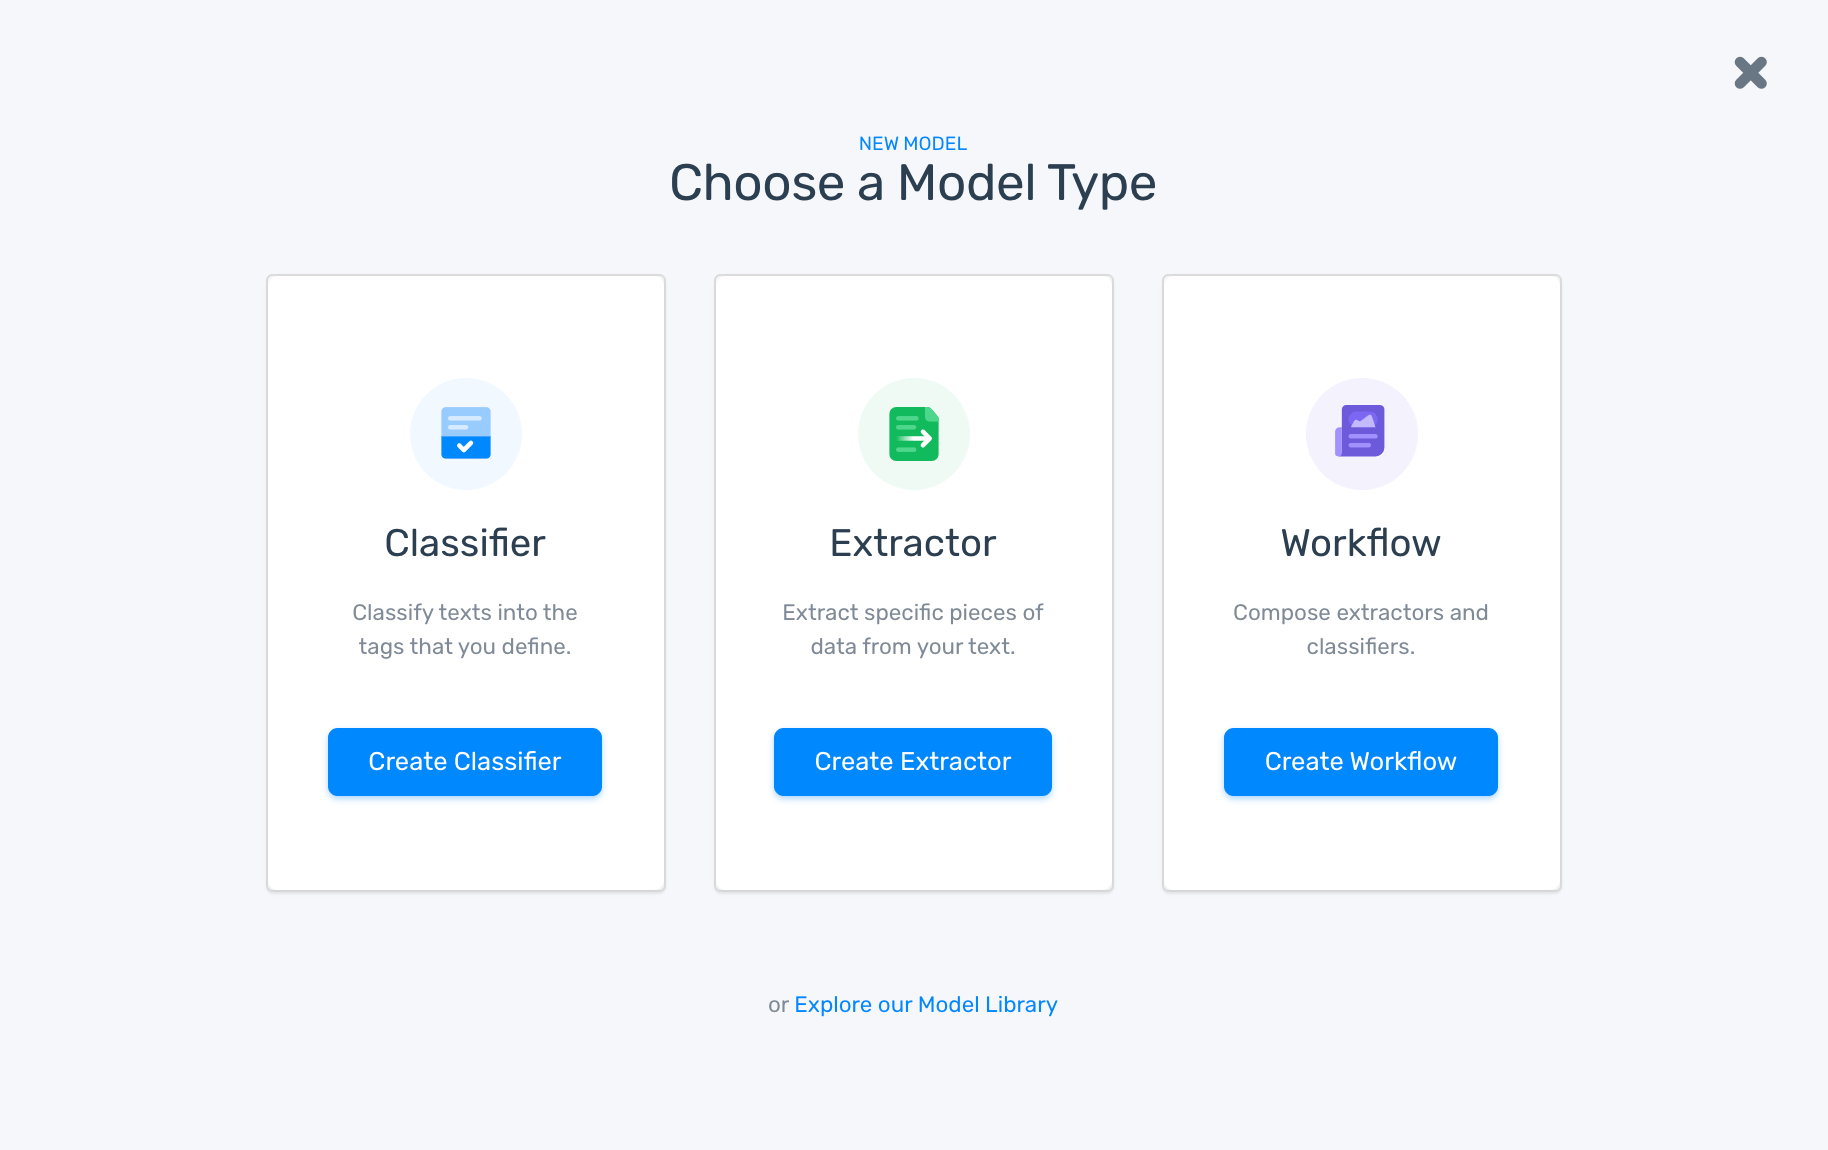 Creating a Model on MonkeyLearn